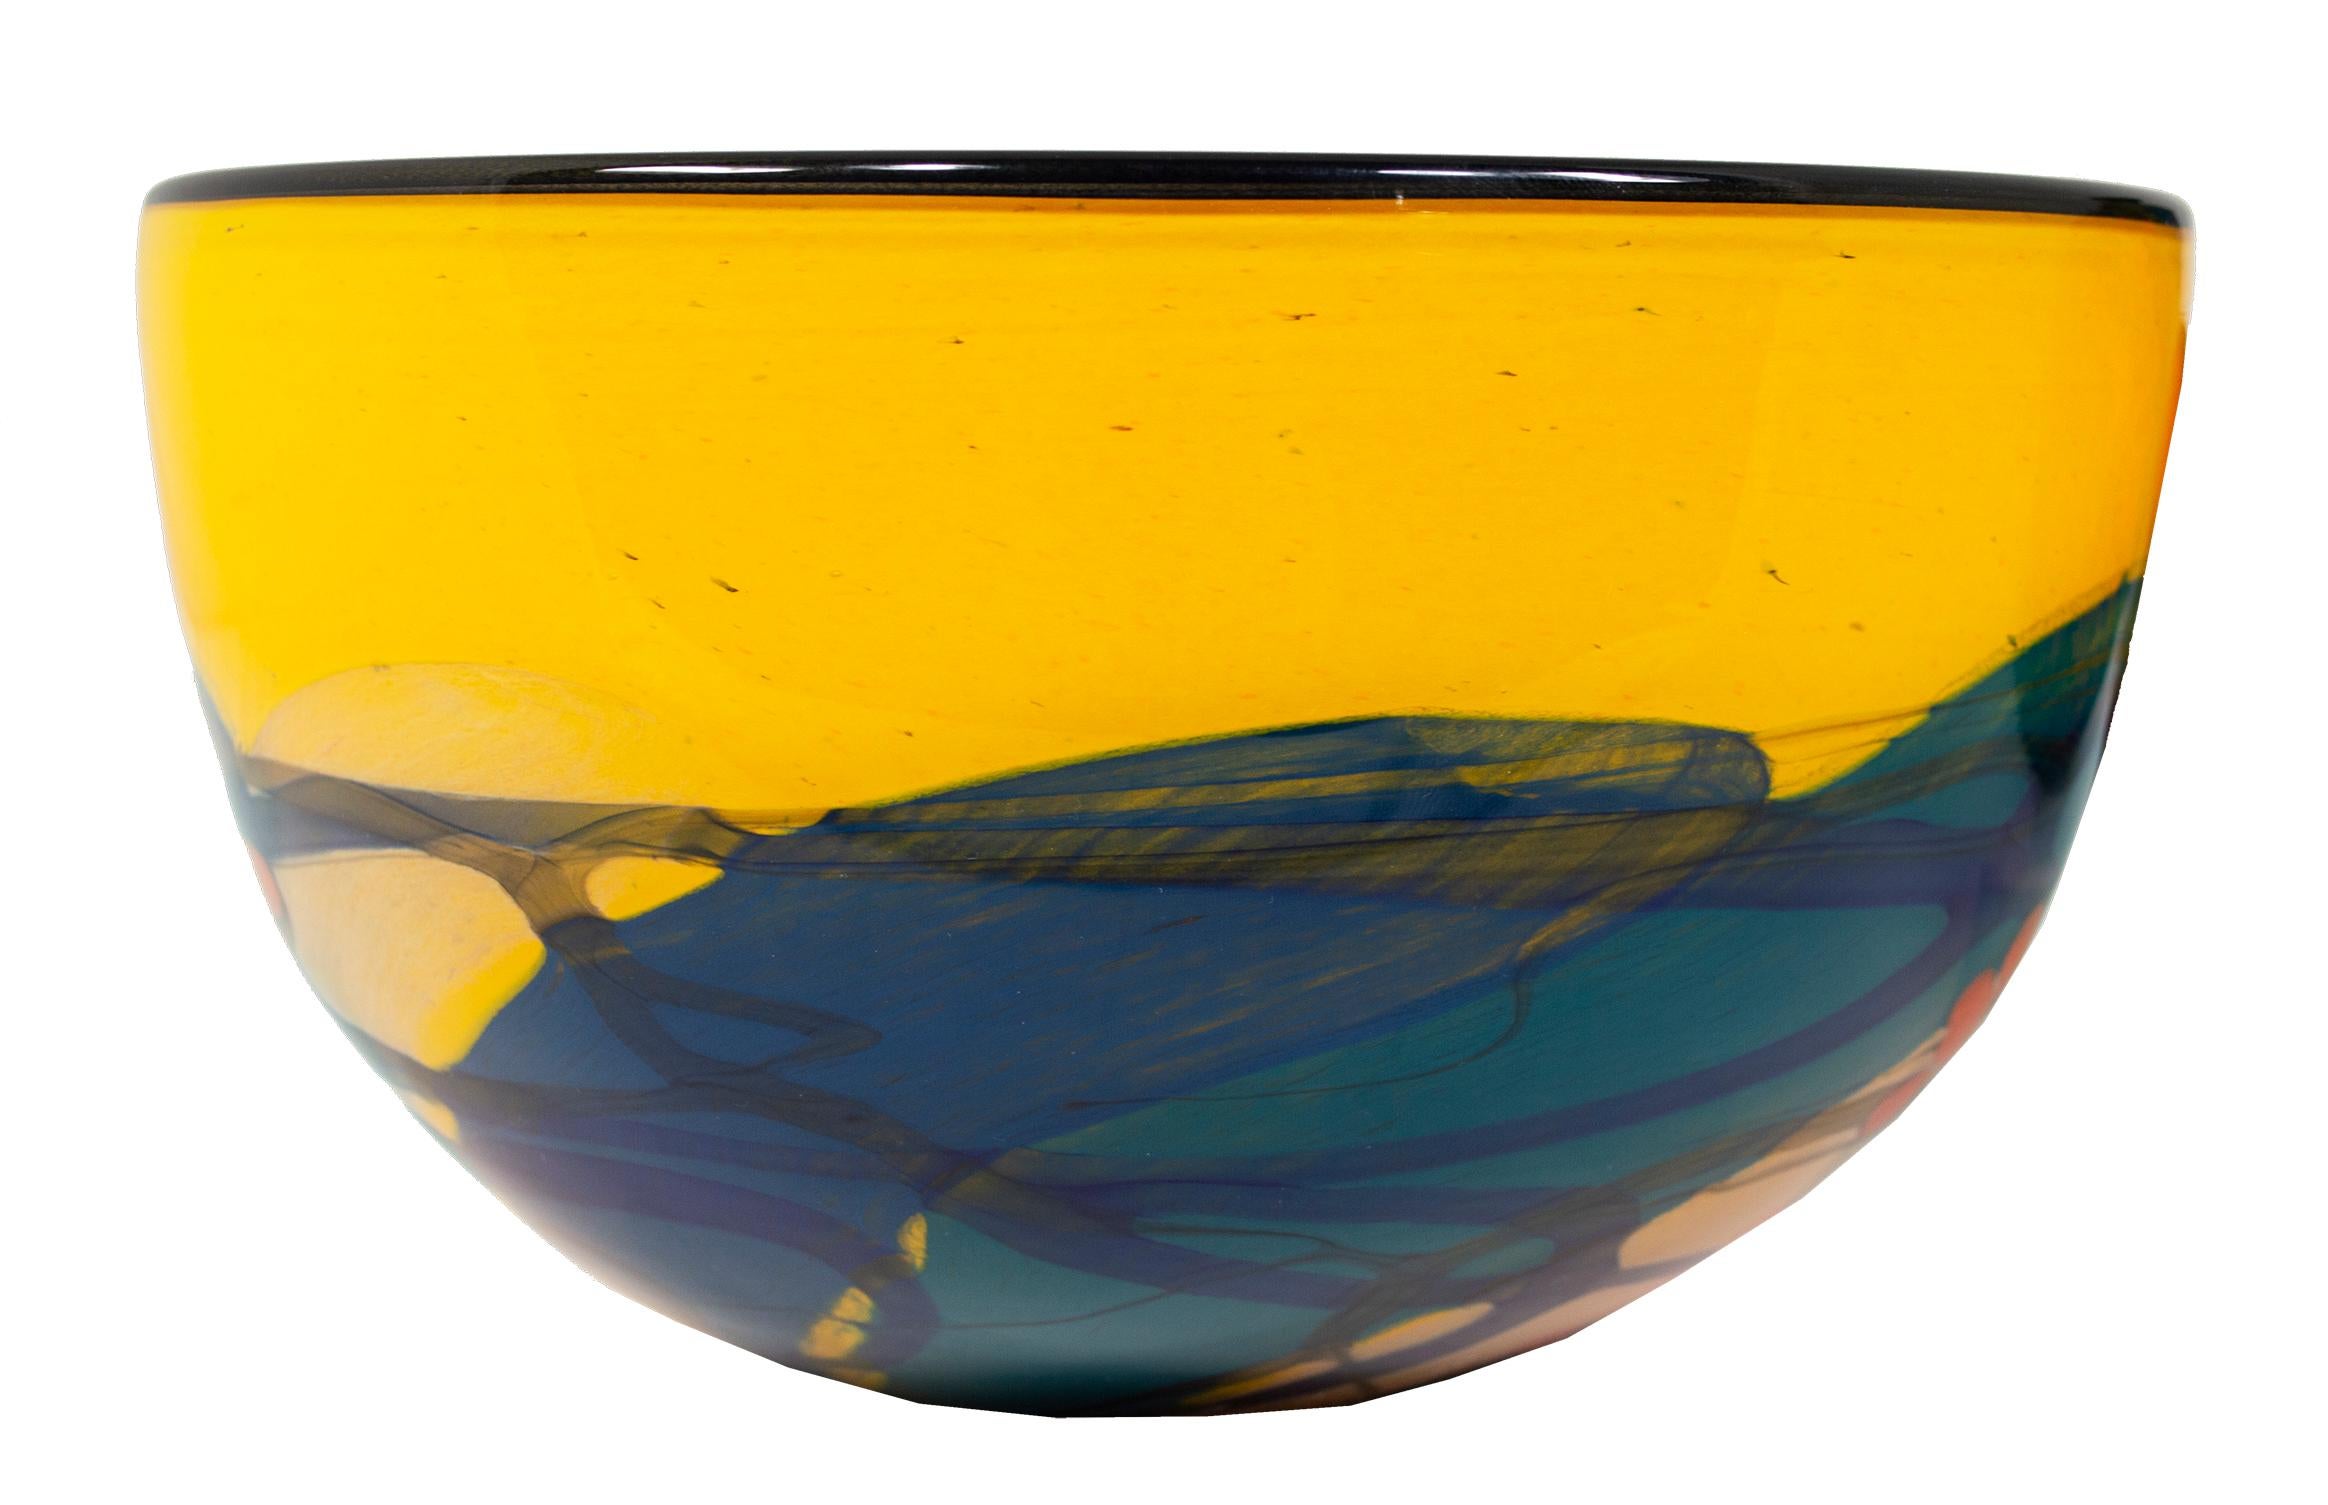 Drawing inspiration from the gestural composition techniques of Abstract Expressionism, Ioan Nemtoi's 'Yellow Bowl' features a brilliant array of colors that seem to shift before the observer's very eyes. Because all of his pieces are hand-blown, no